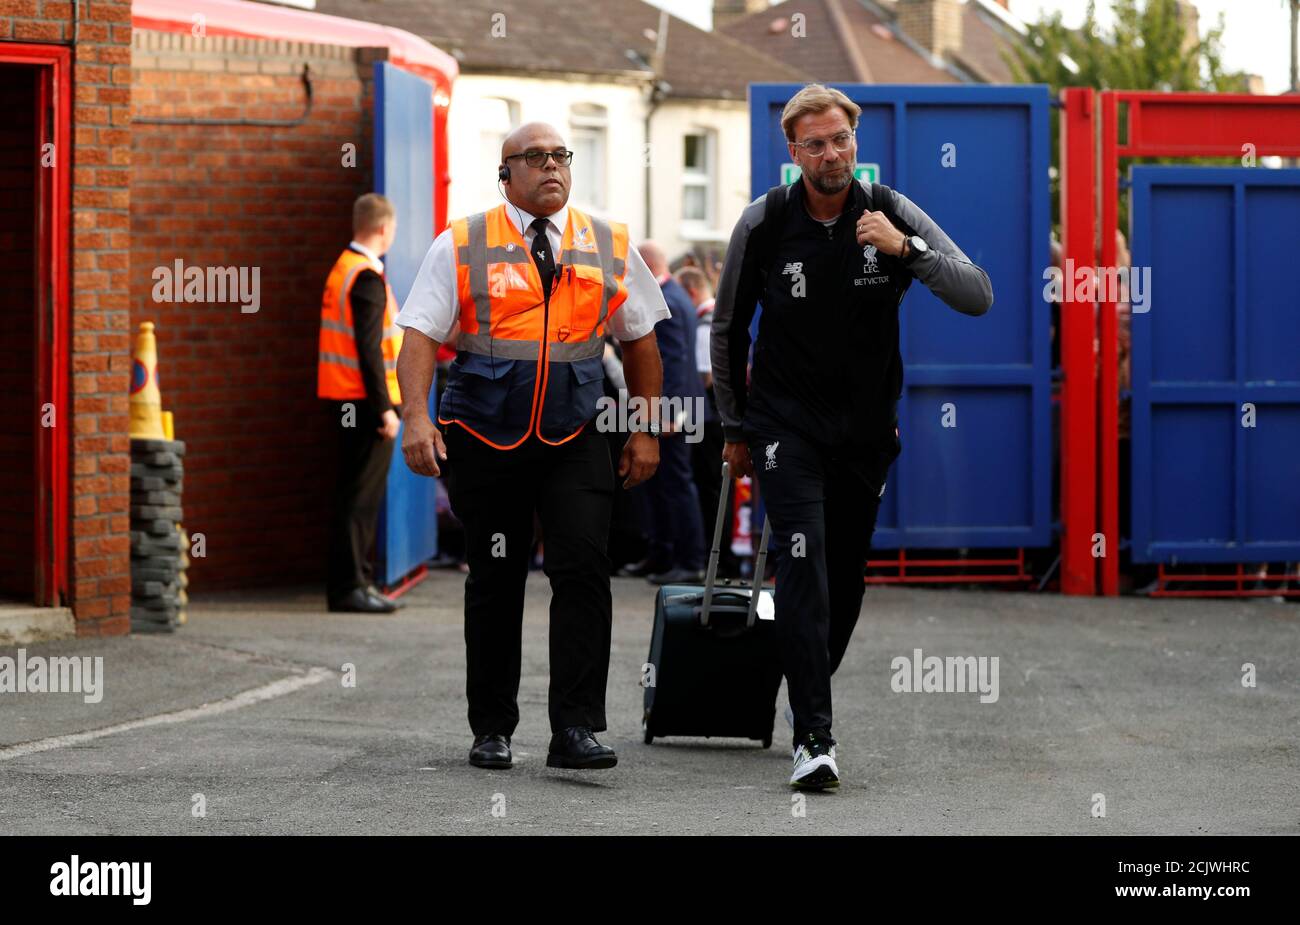 Soccer Football - Premier League - Crystal Palace v Liverpool - Selhurst Park, London, Britain - August 20, 2018  Liverpool manager Juergen Klopp before the match   Action Images via Reuters/John Sibley  EDITORIAL USE ONLY. No use with unauthorized audio, video, data, fixture lists, club/league logos or 'live' services. Online in-match use limited to 75 images, no video emulation. No use in betting, games or single club/league/player publications.  Please contact your account representative for further details. Stock Photo